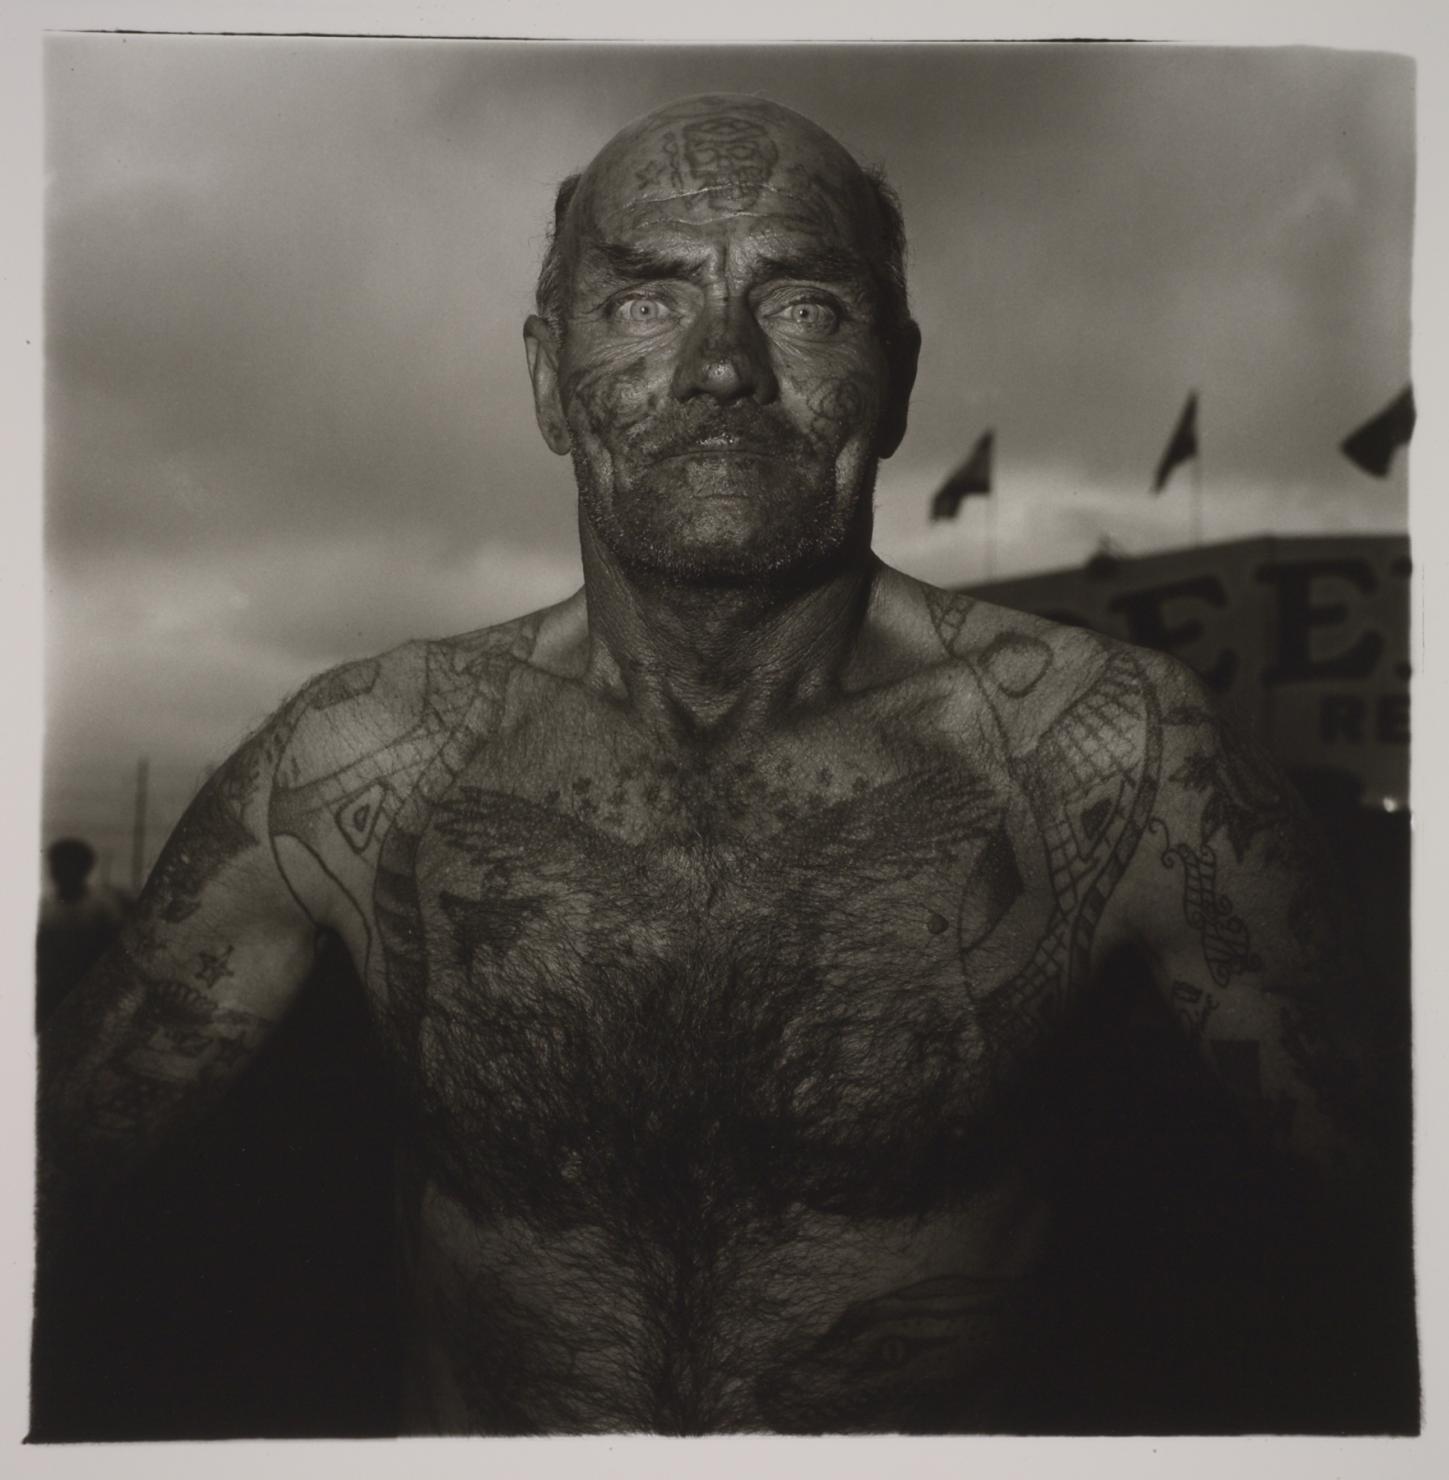 Black and white portrait of a shirtless, bald white man heavily tattooed on his arms, torso, and head 